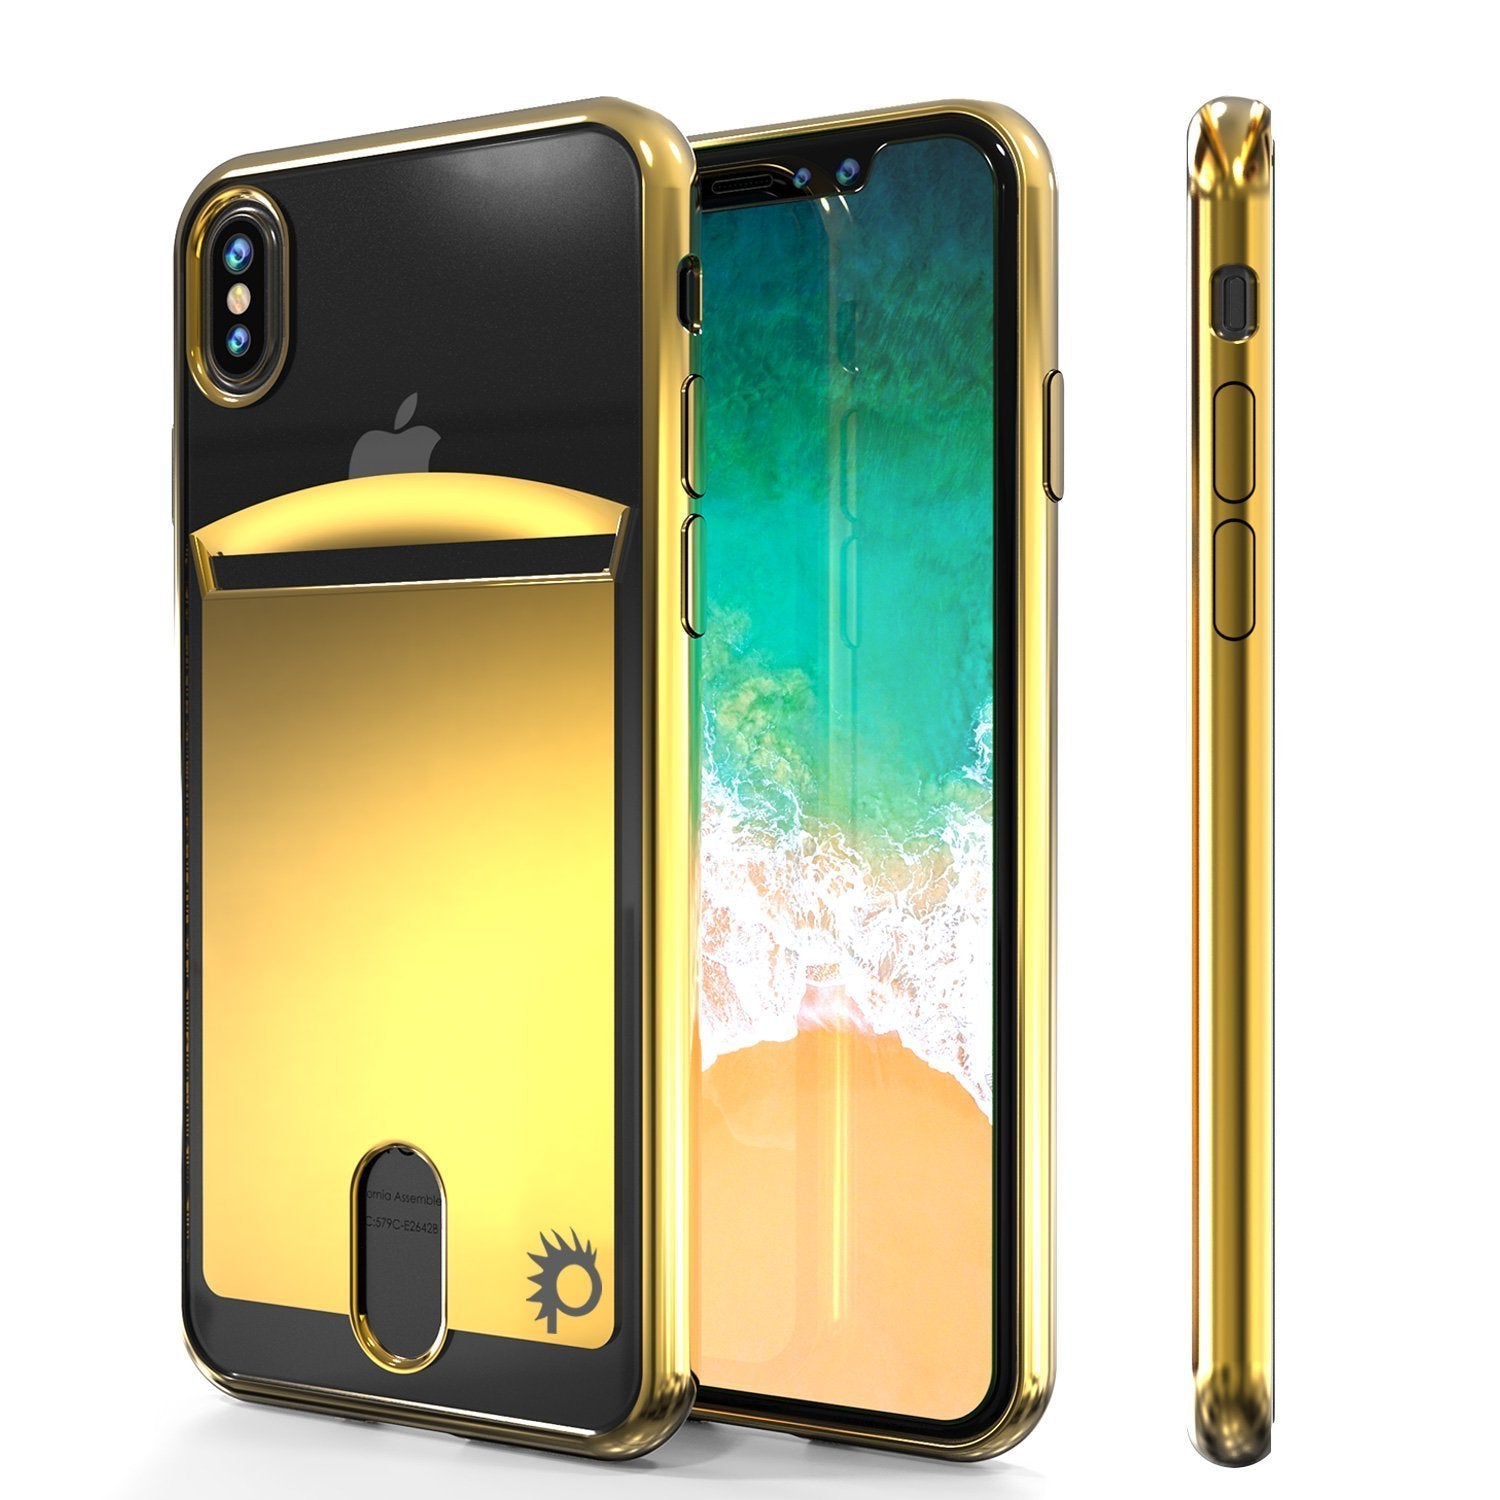 iPhone X Case, PUNKcase [LUCID Series] Slim Fit Protective Dual Layer Armor Cover [Gold] - PunkCase NZ